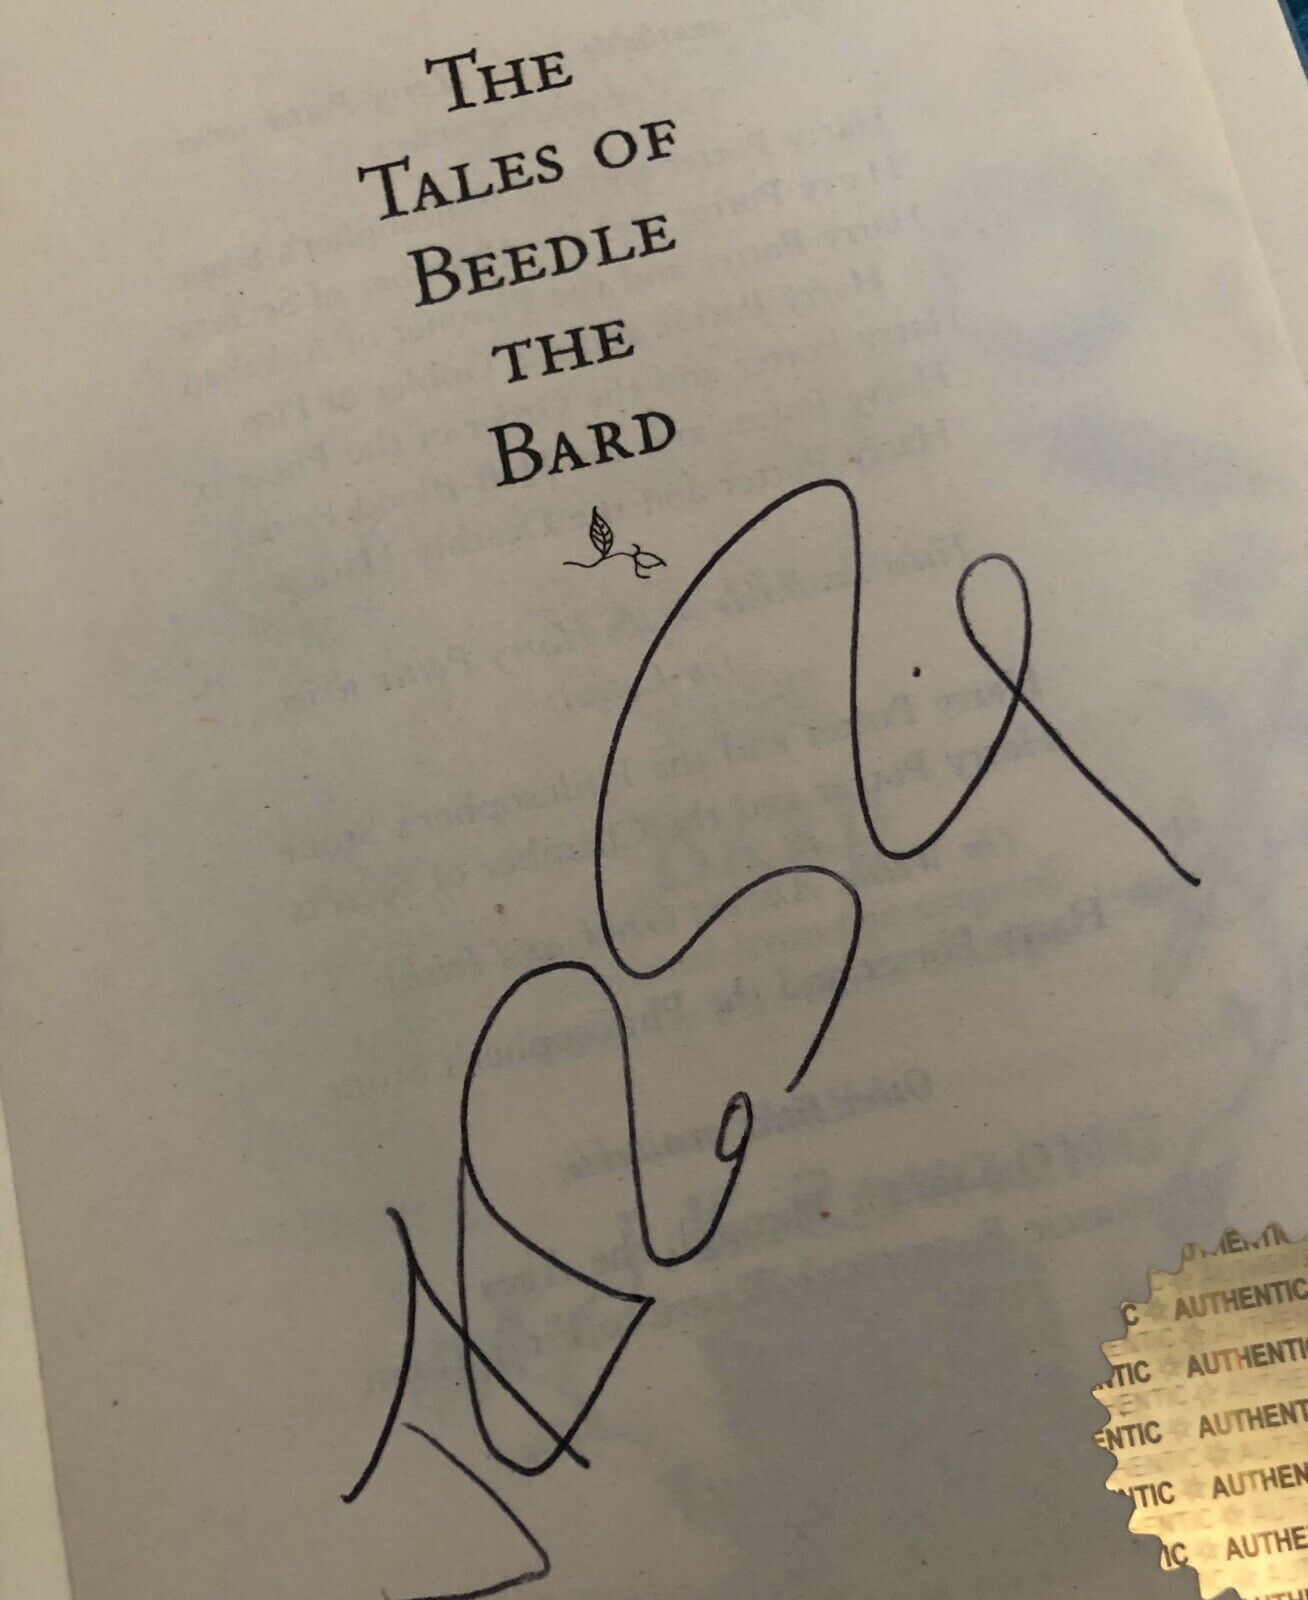 J.K. Rowling forgery found inside a UK Tales of Beedle the Bard on eBay